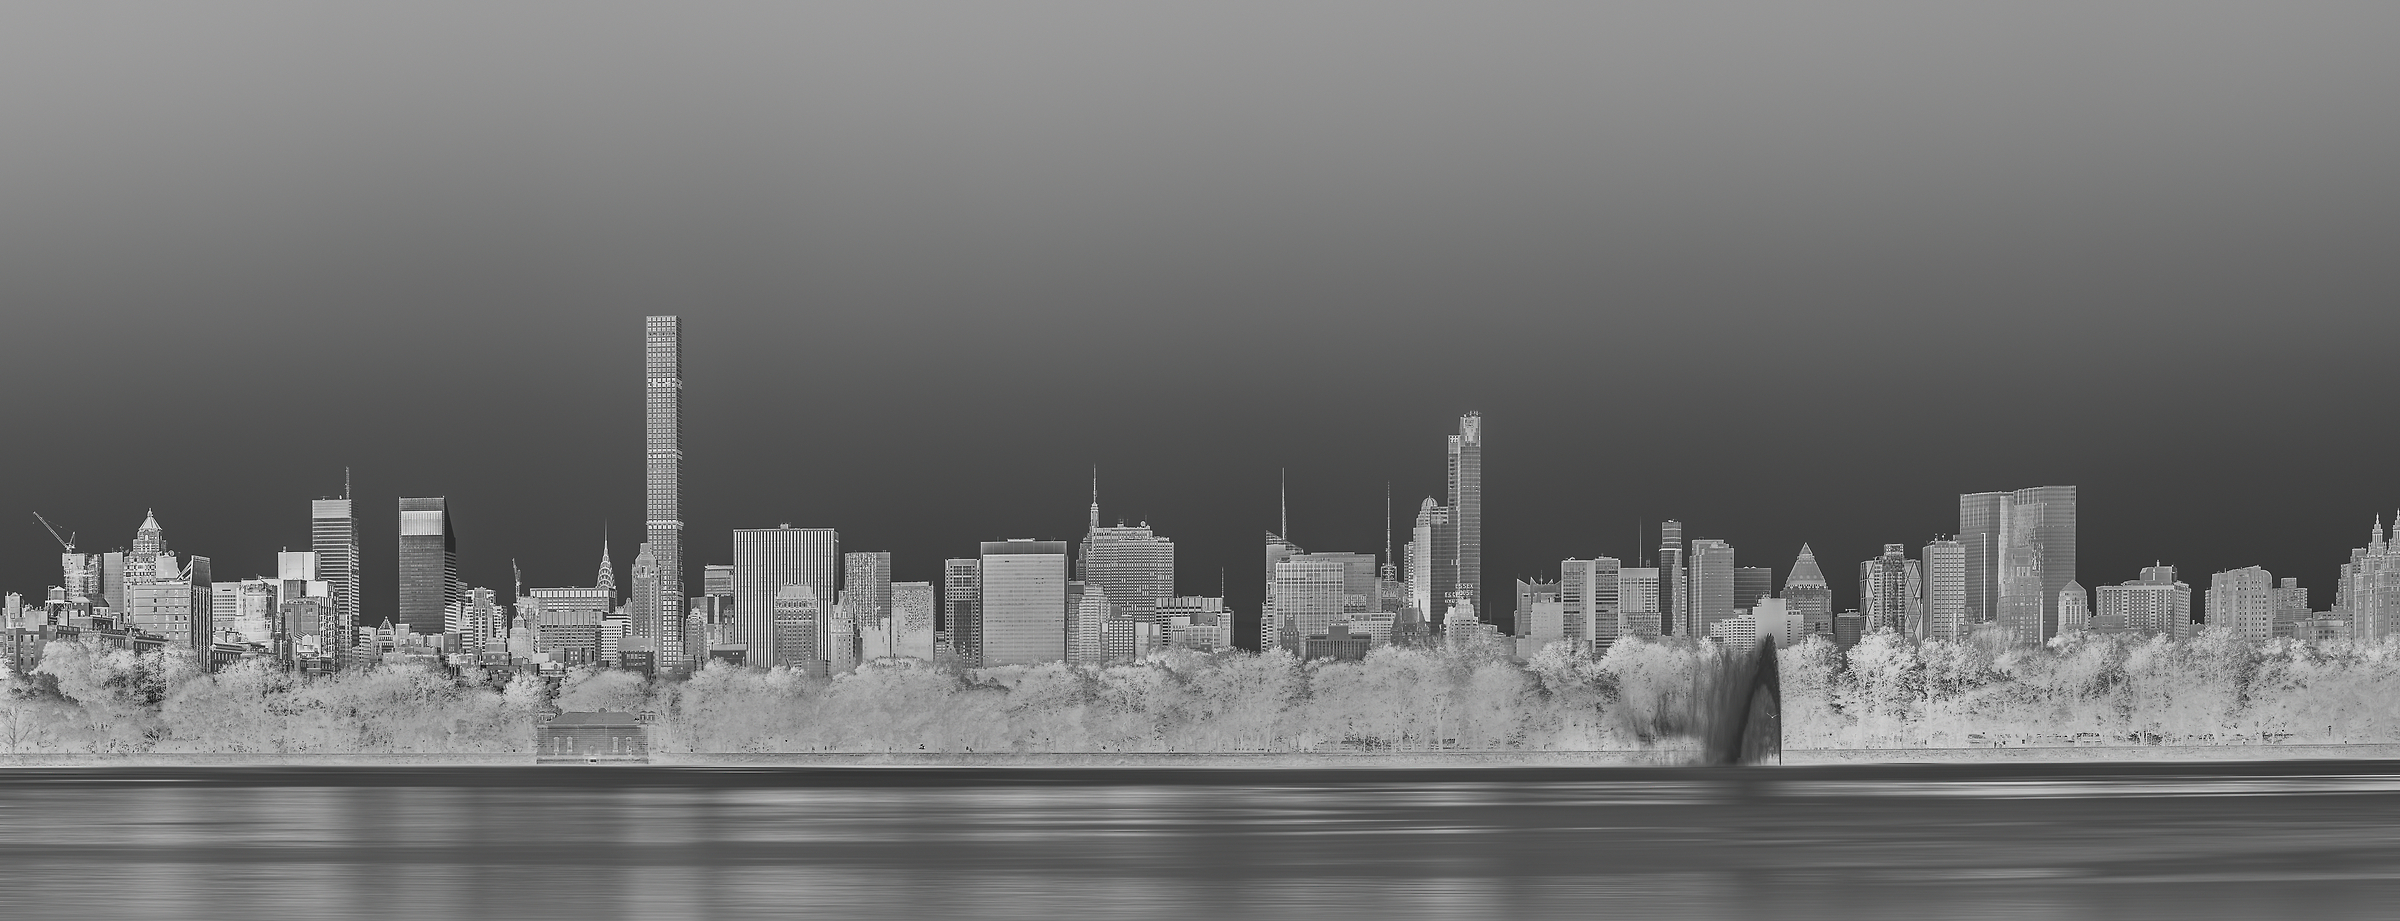 215 megapixels! A very high definition cityscape VAST photo of the Midtown Manhattan city skyline in New York City from the reservoir in Central Park; created by Dan Piech